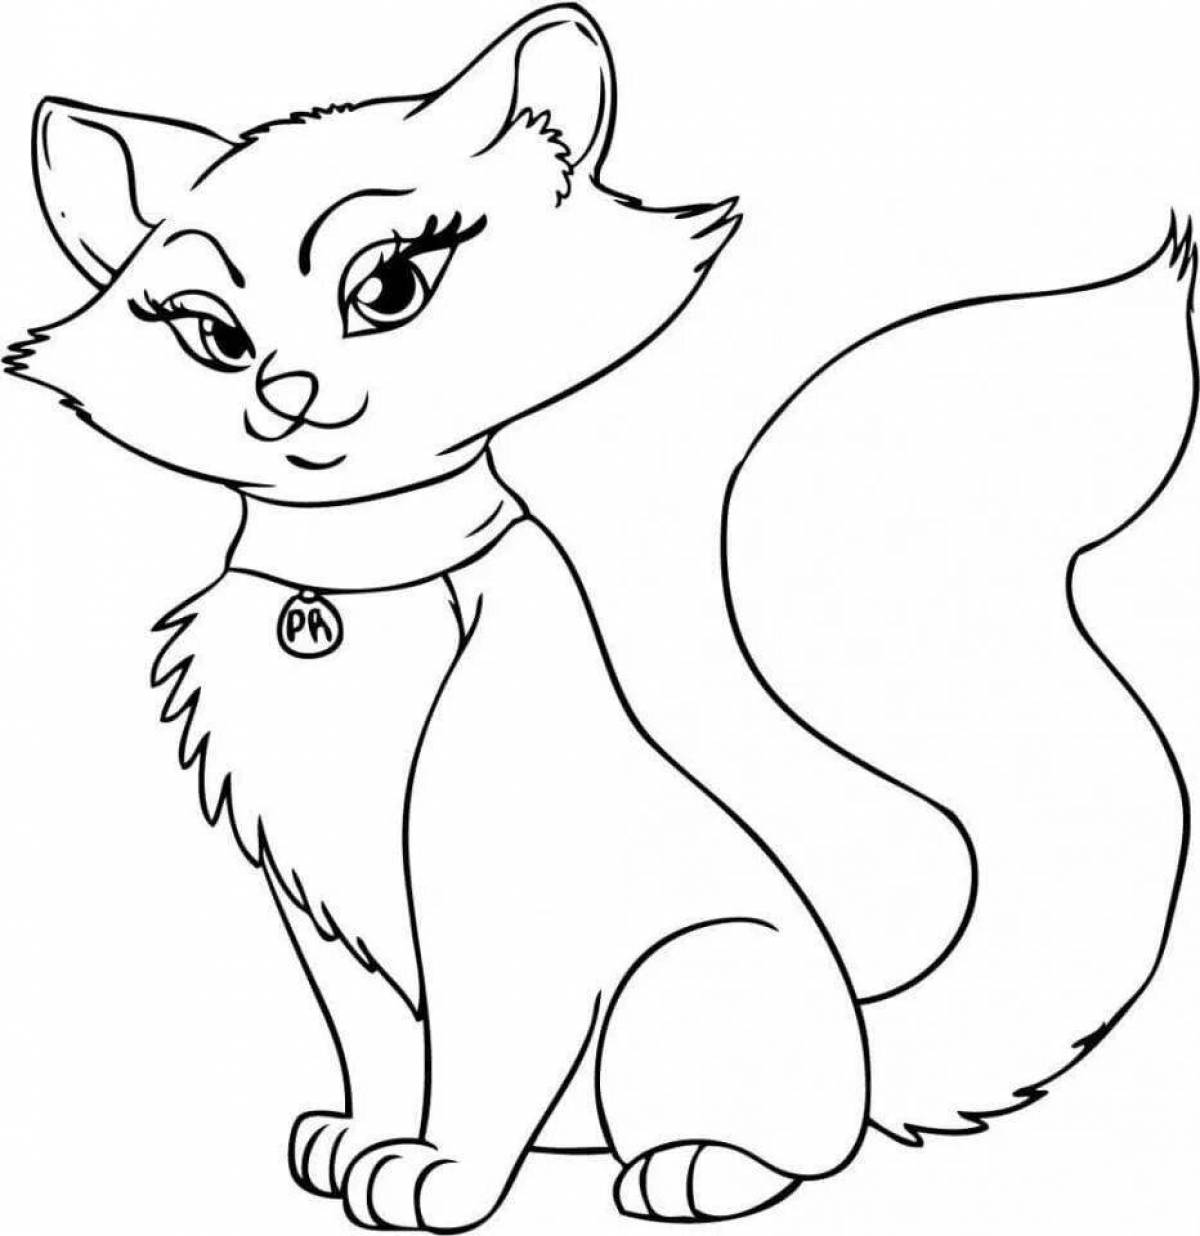 Fluffy cats coloring pages